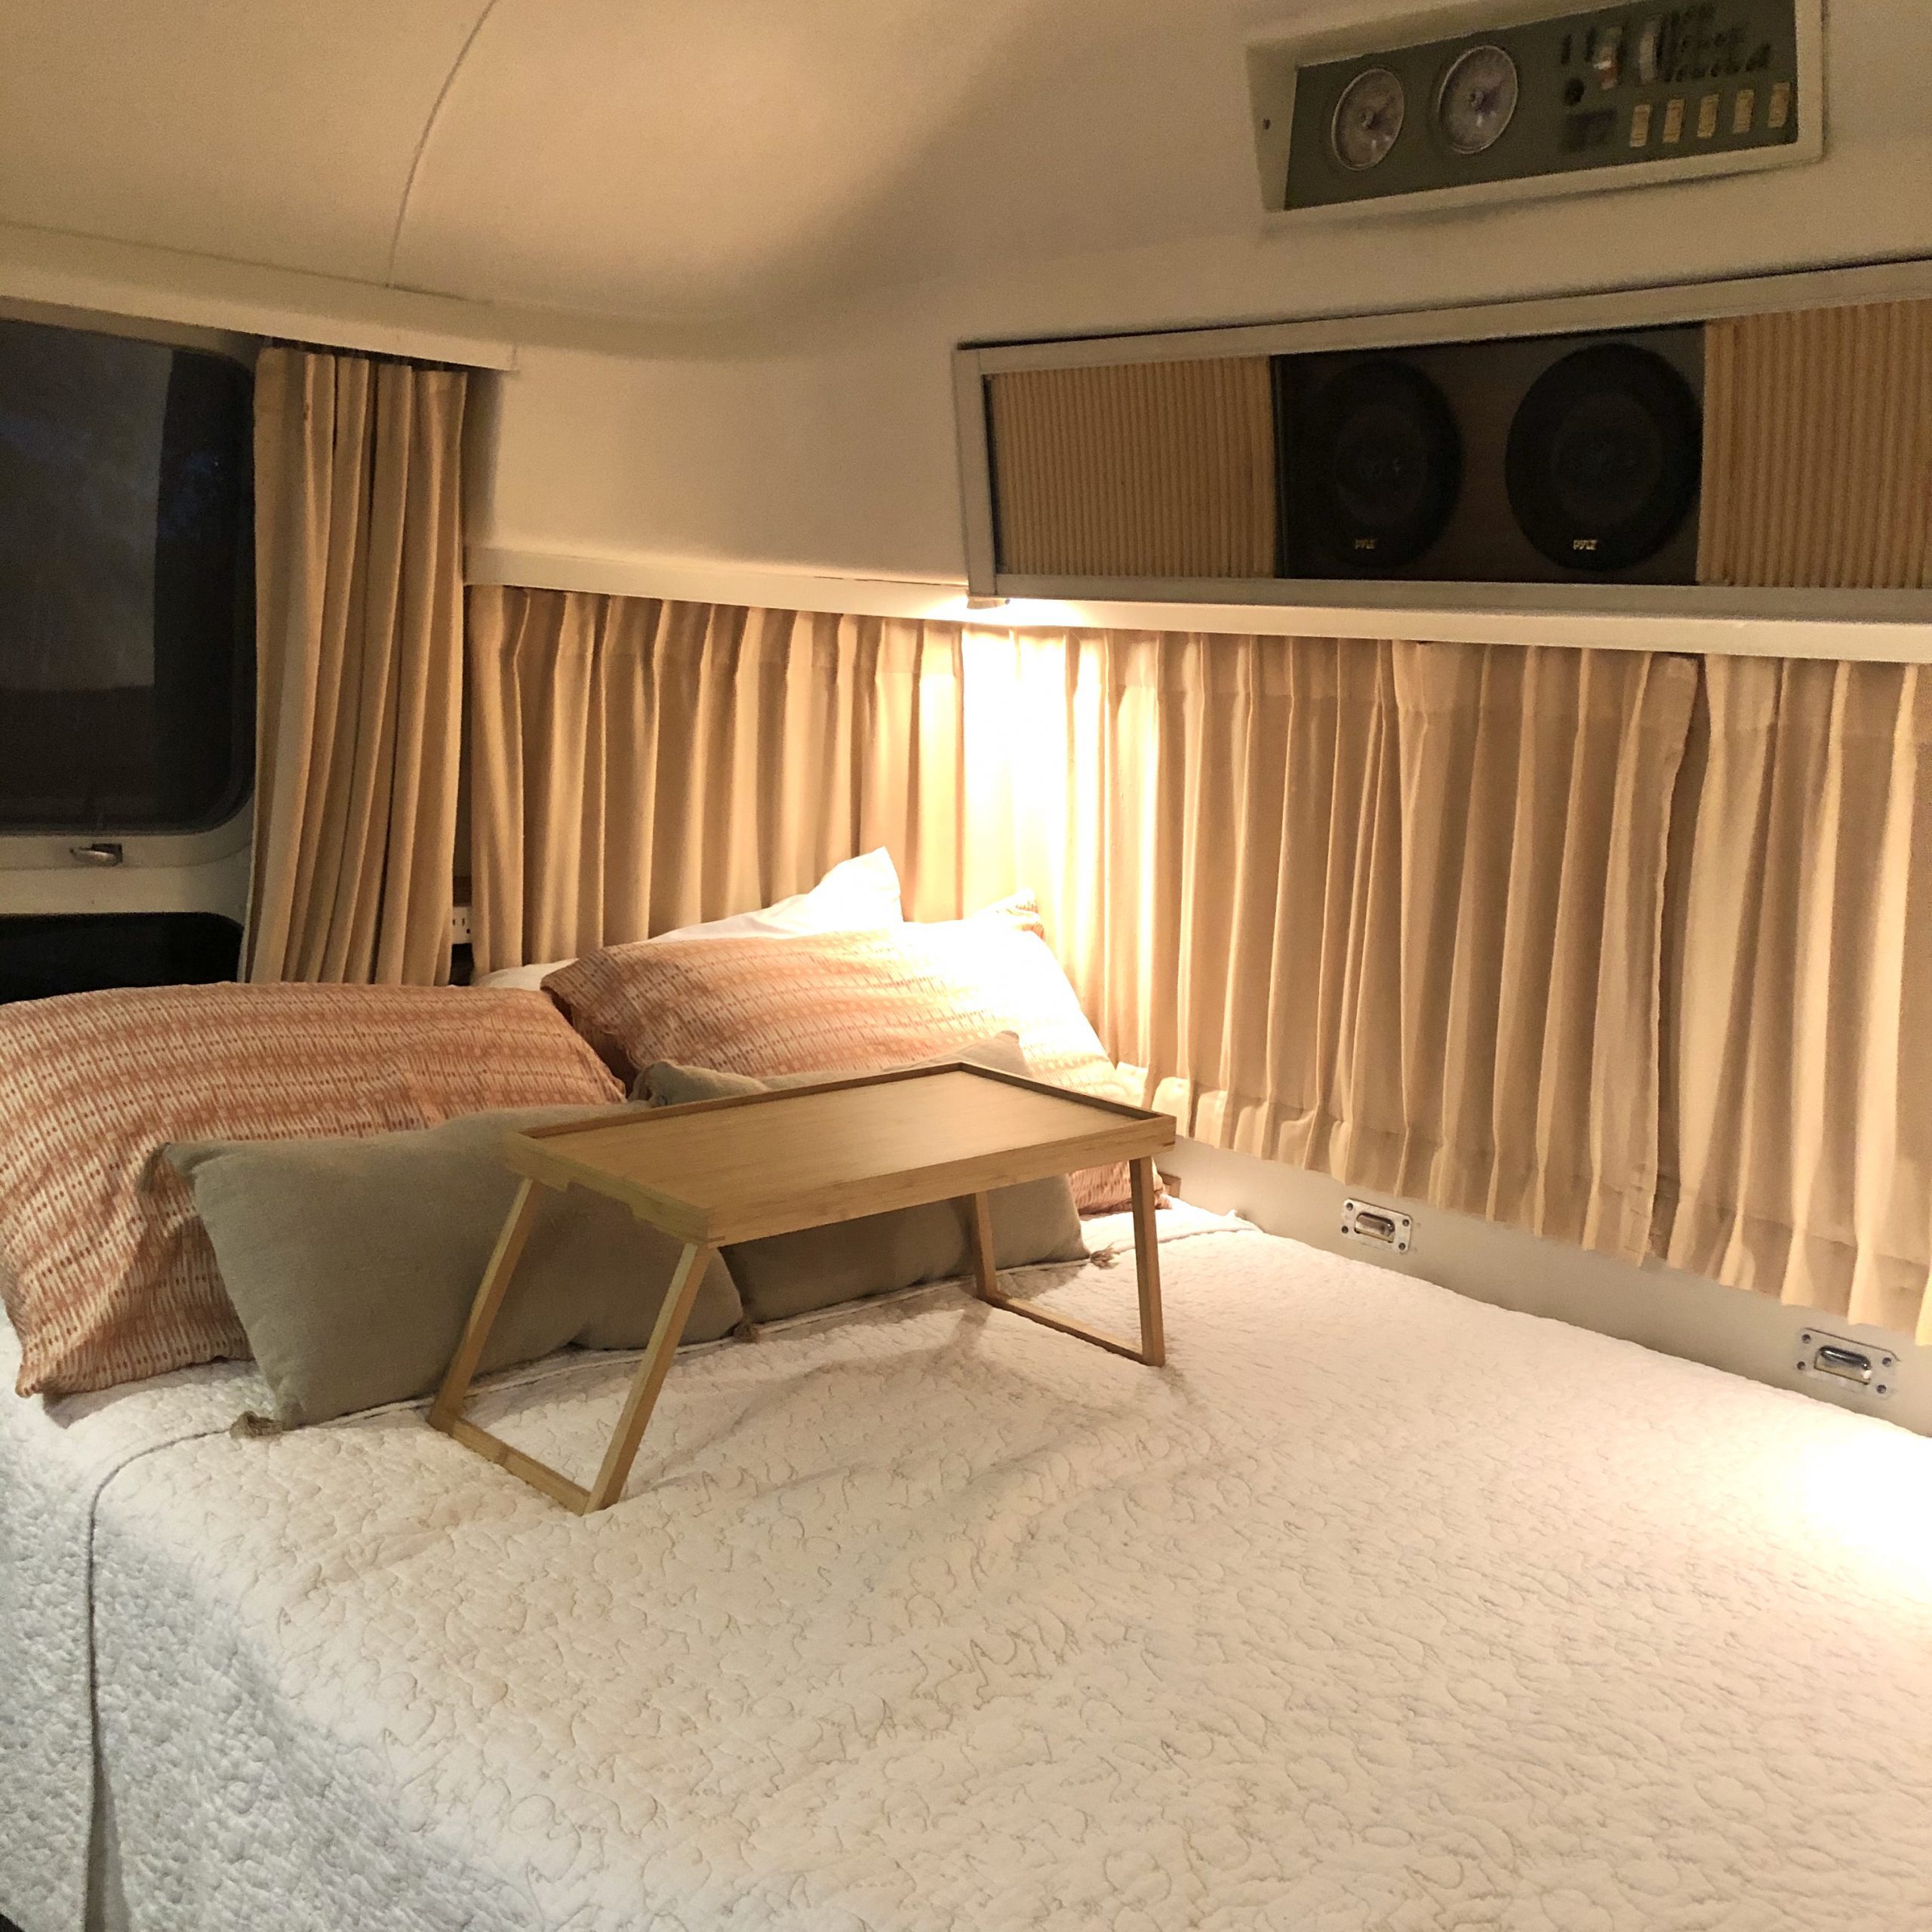 RV bed staycation